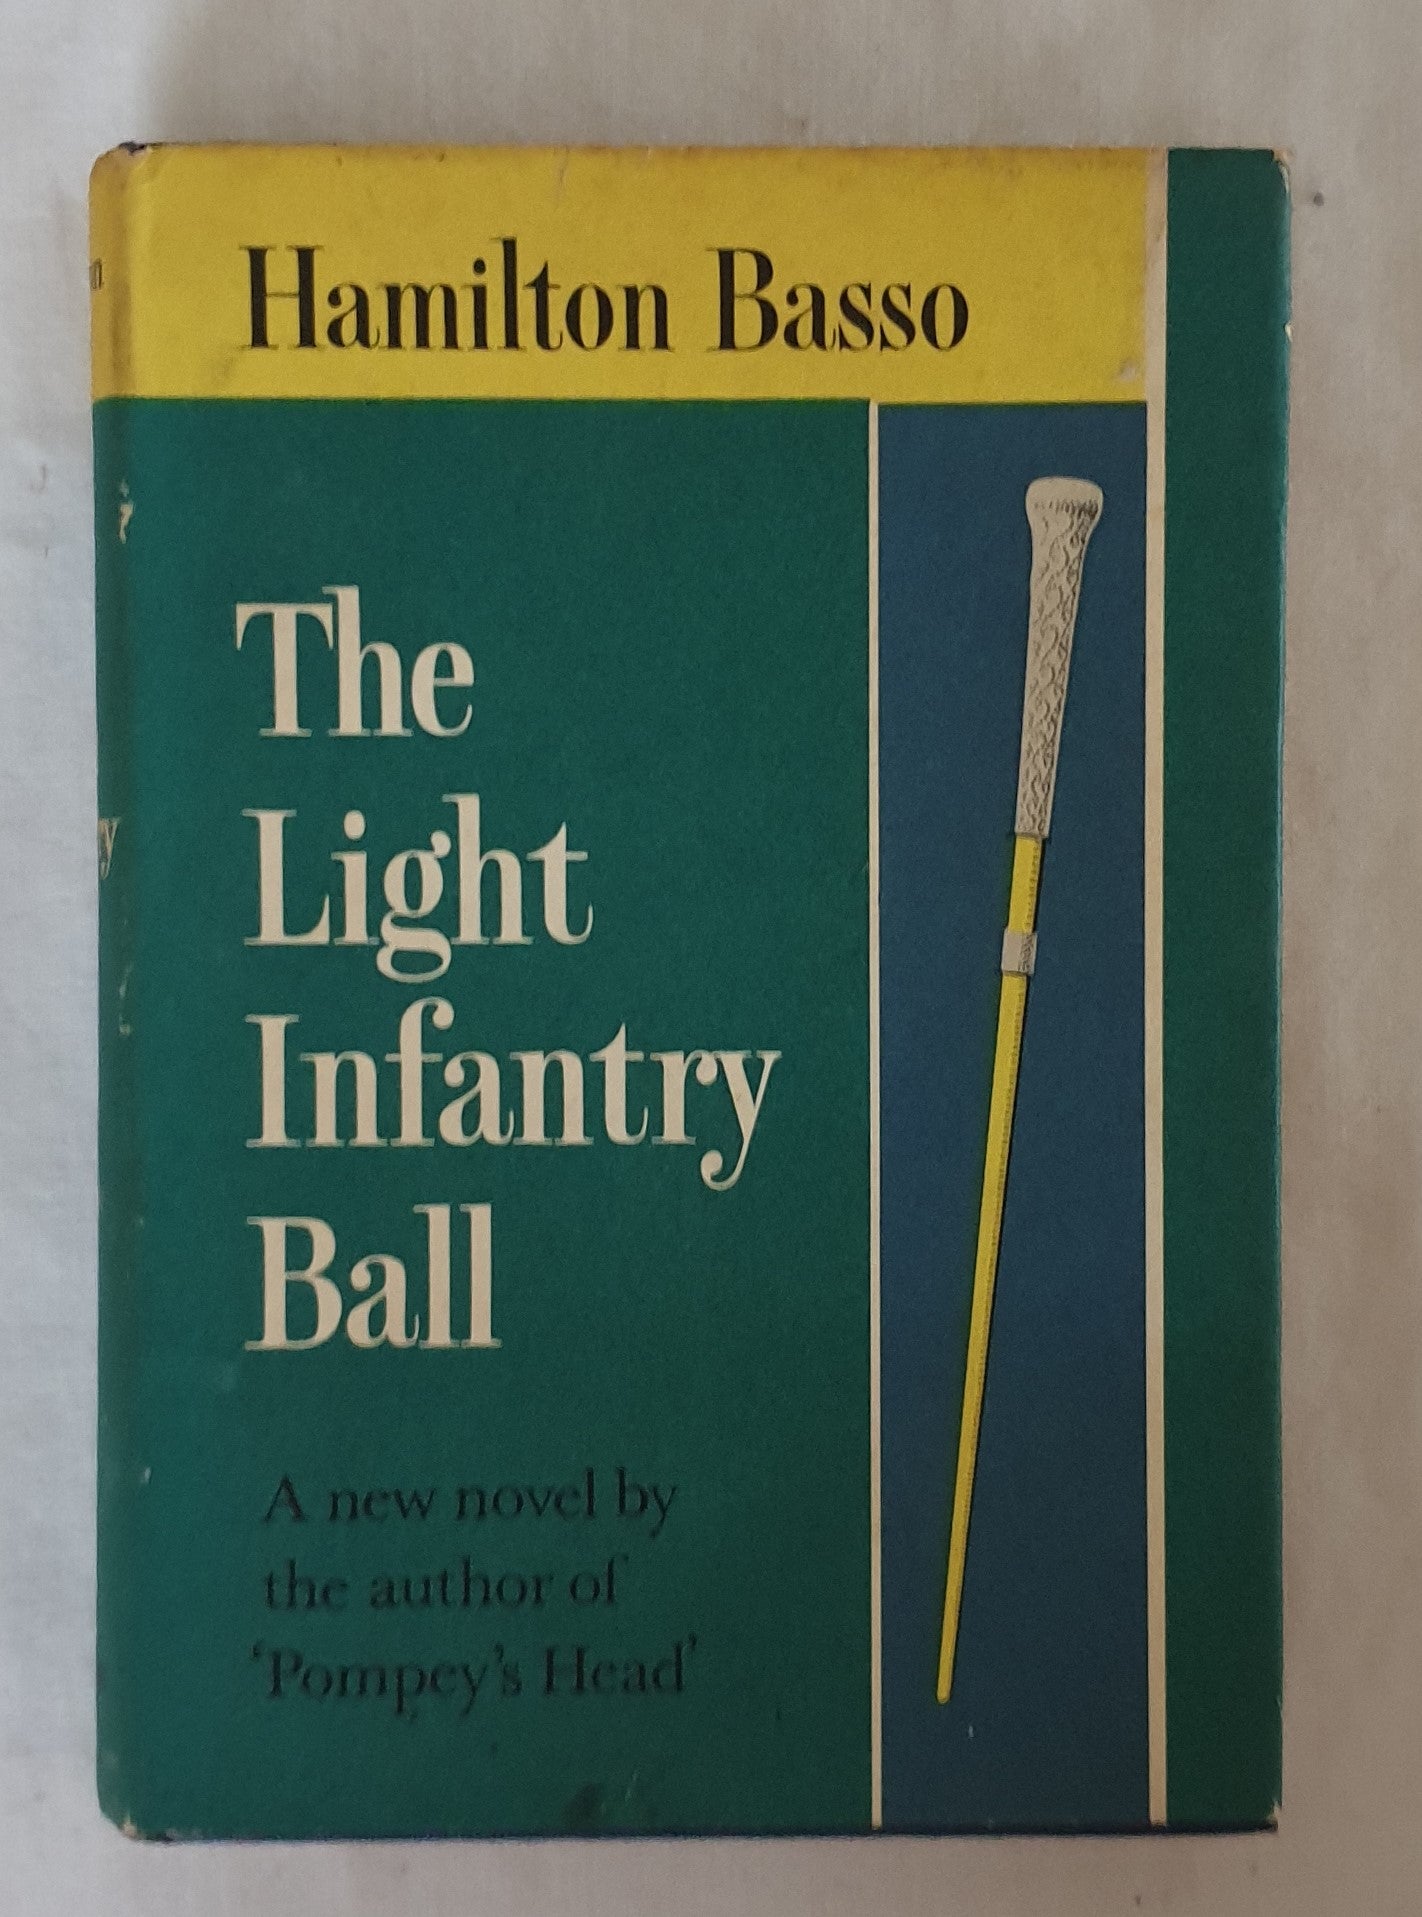 The Light Infantry Ball by Hamilton Basso